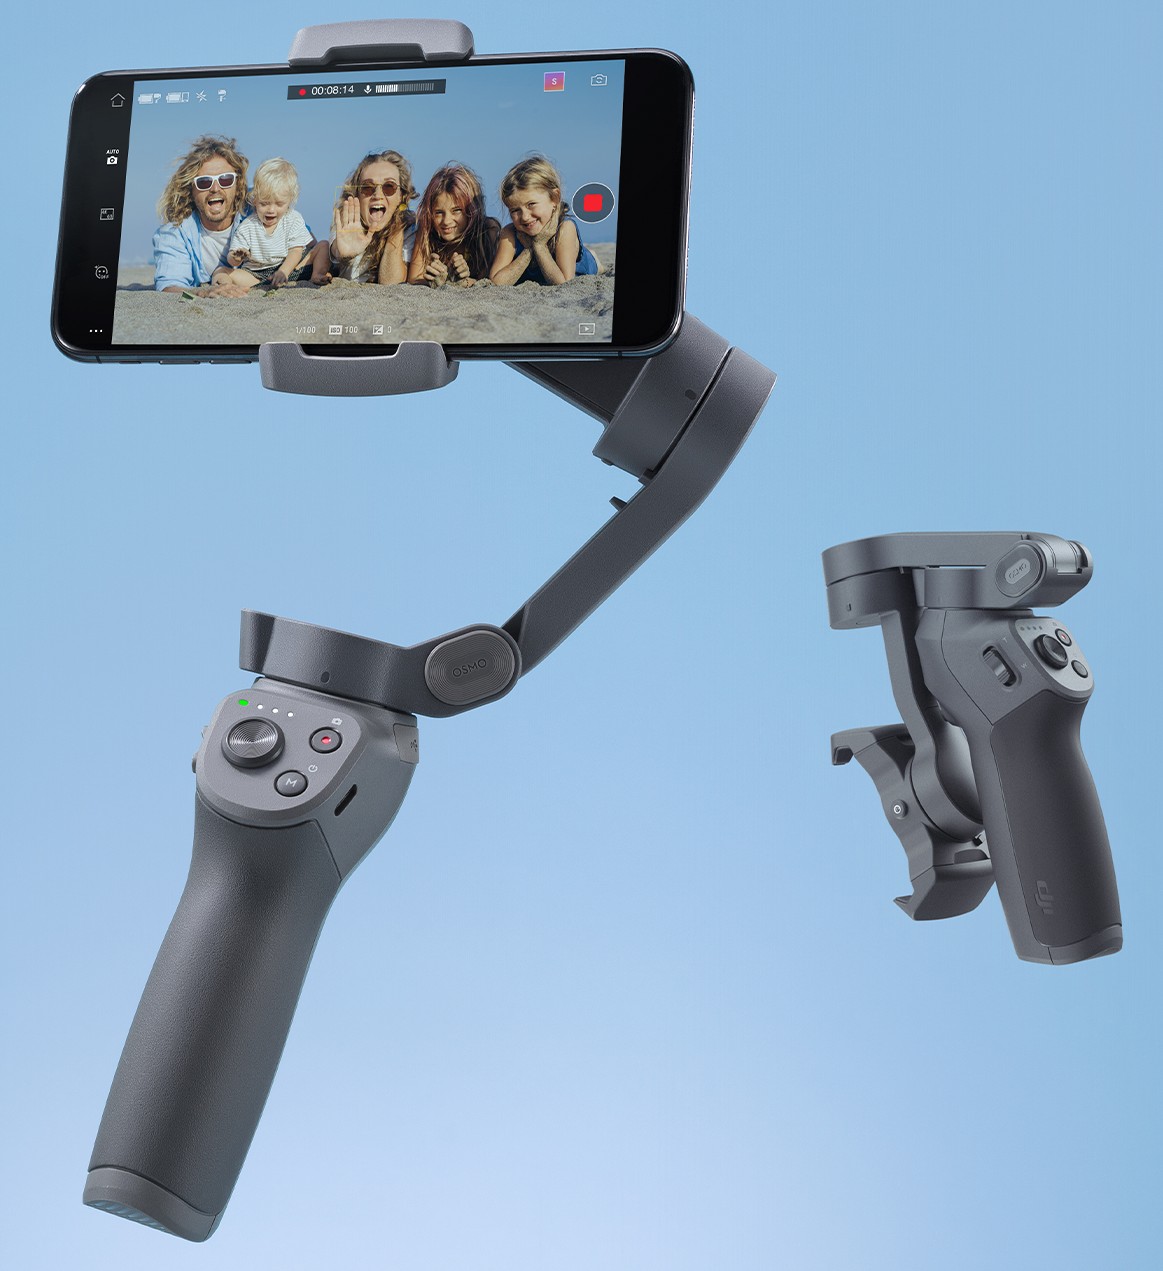 The New DJI Osmo Mobile 3 May Be The Most Compact & Flexible Smartphone